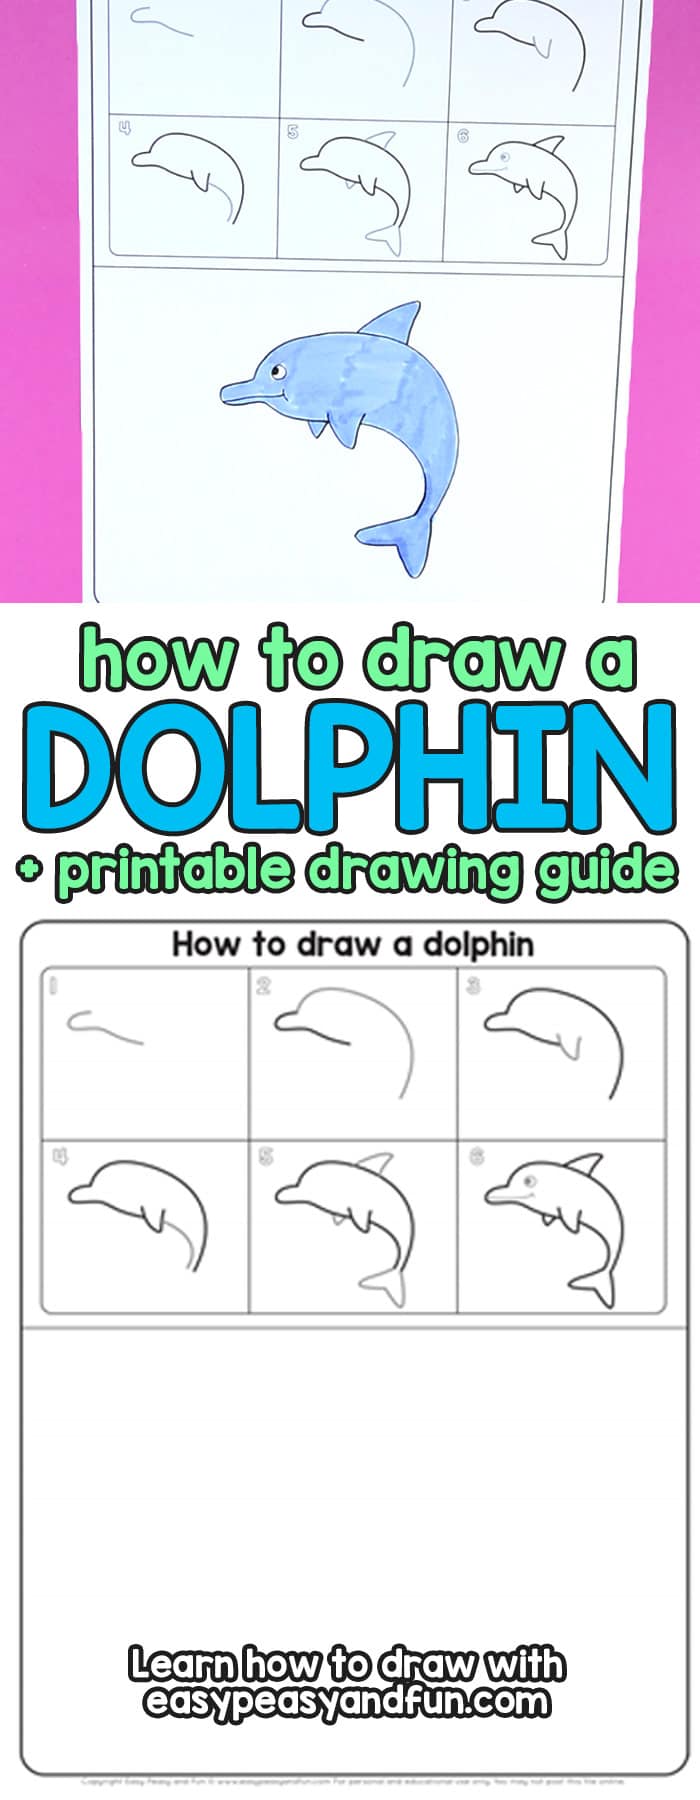 How to Draw a Dolphin Step by Step for Kids